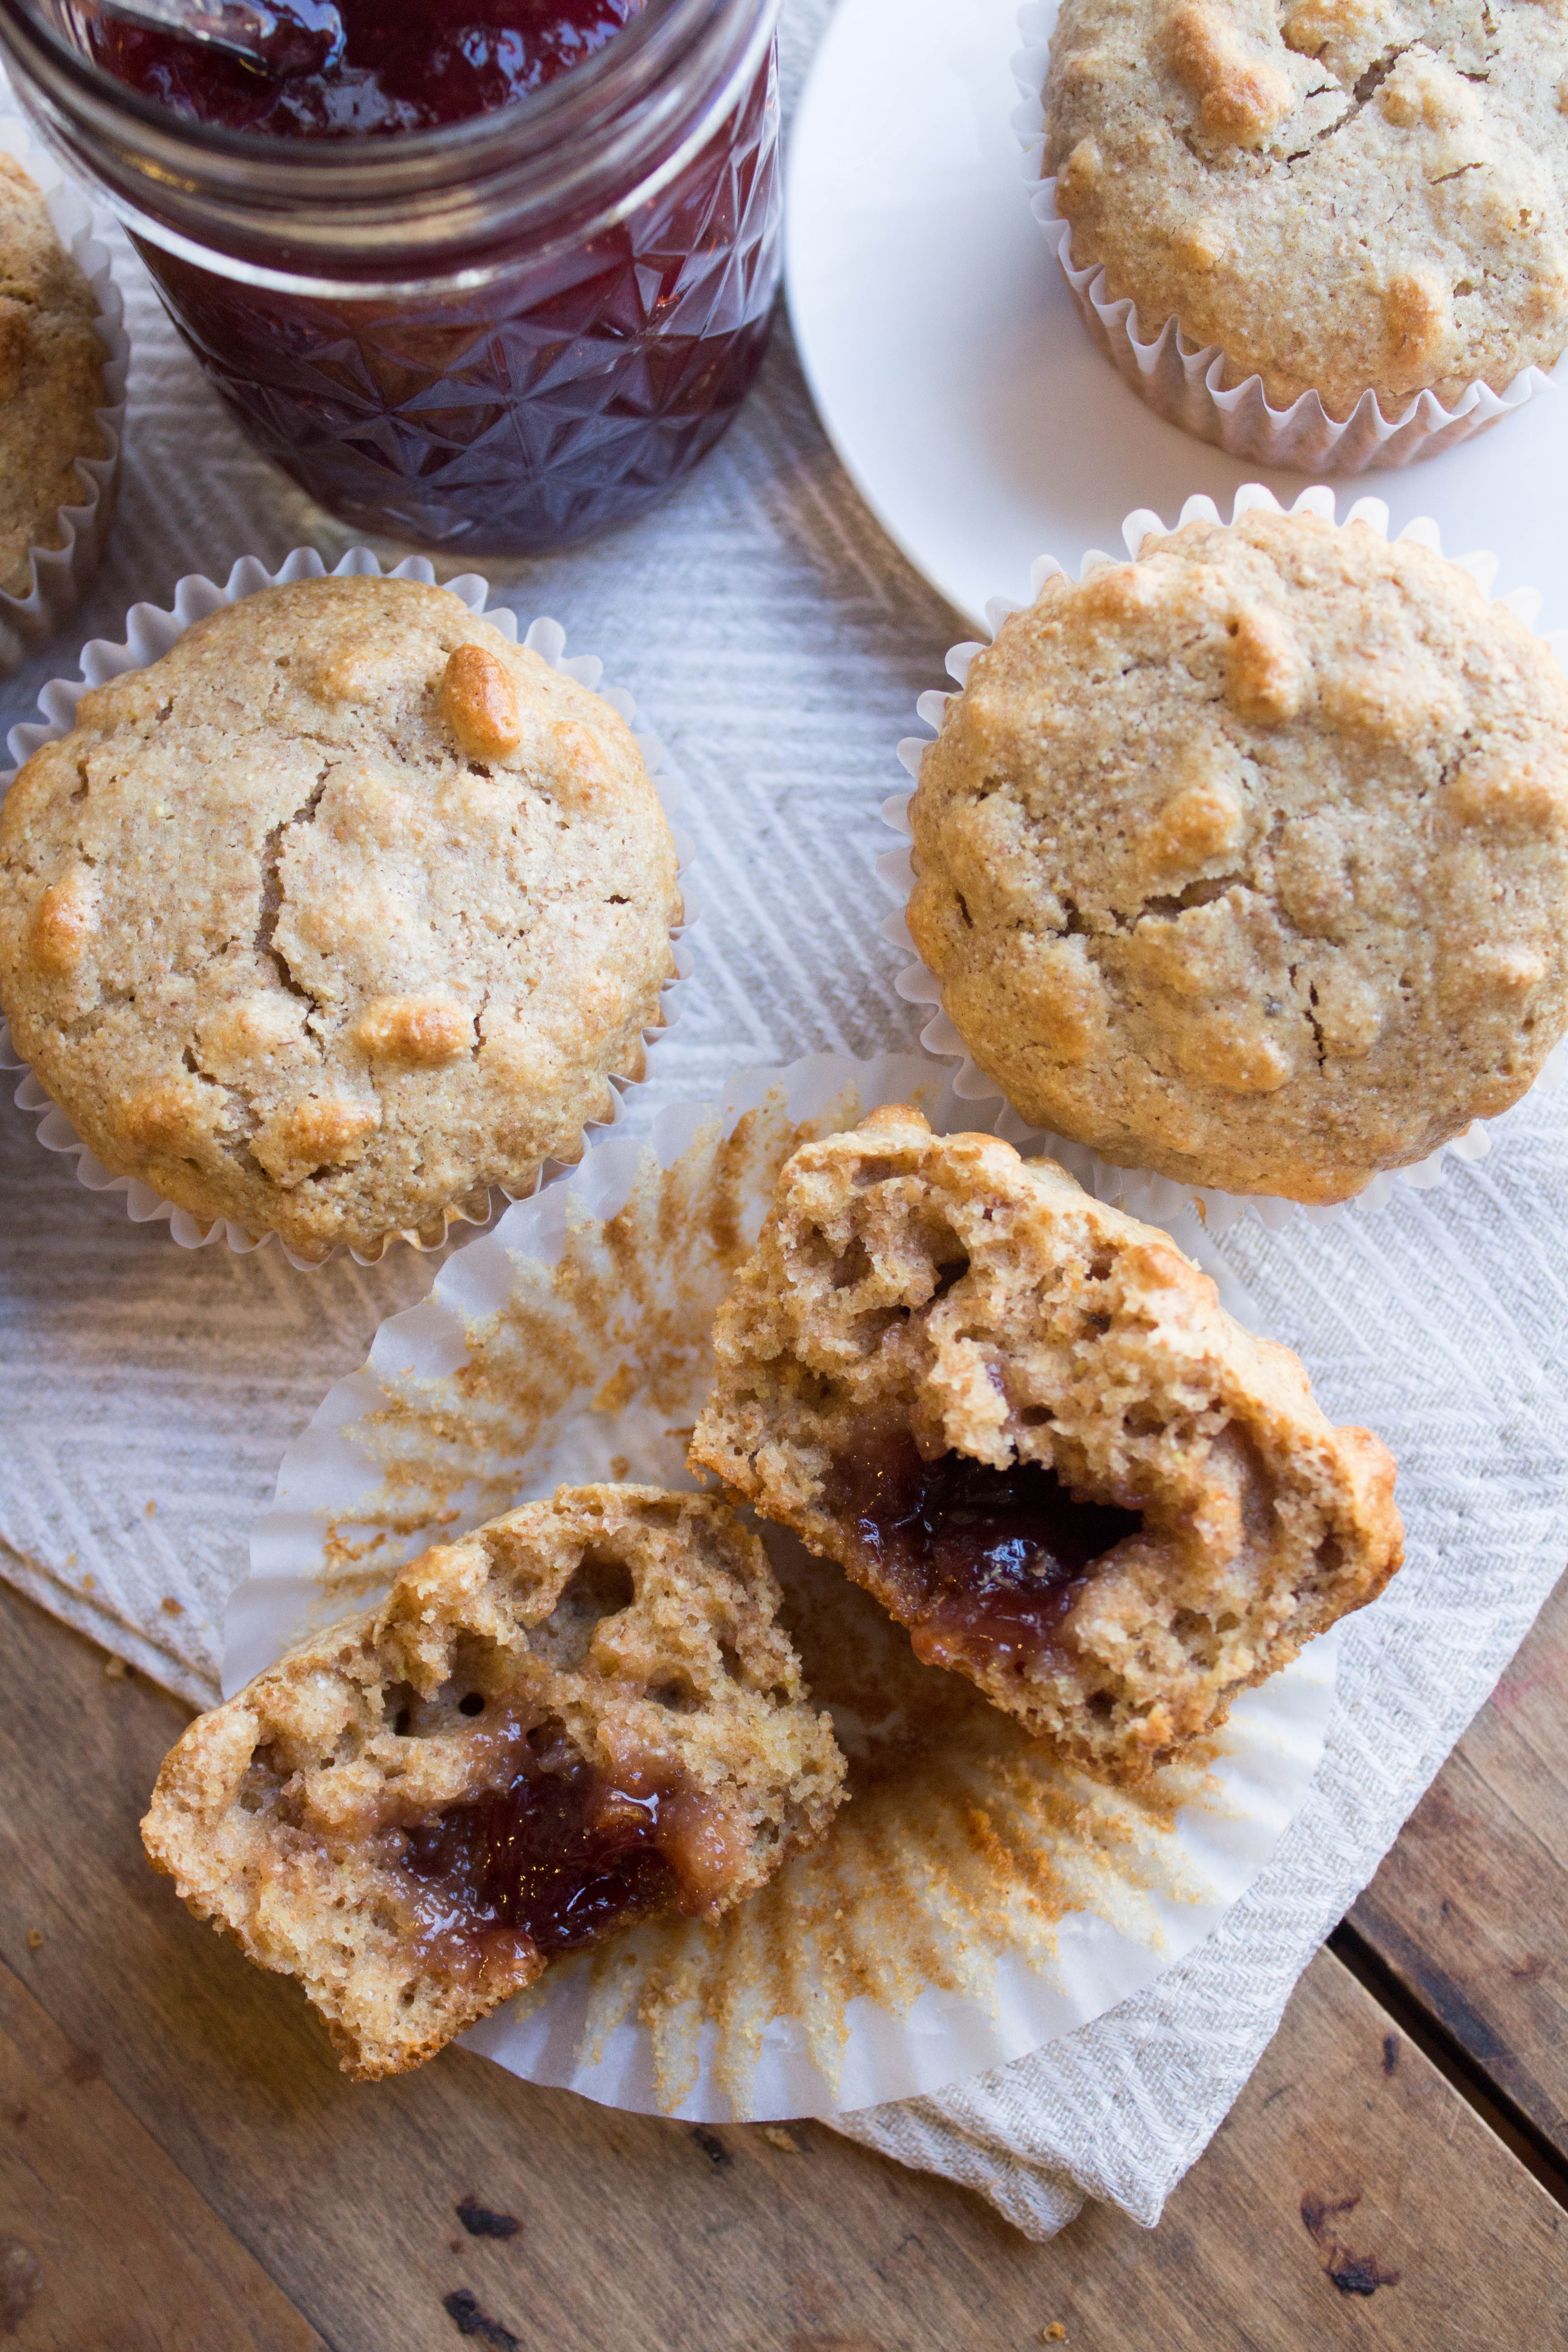 Whole Wheat Peanut Butter and Jelly Muffins Recipe